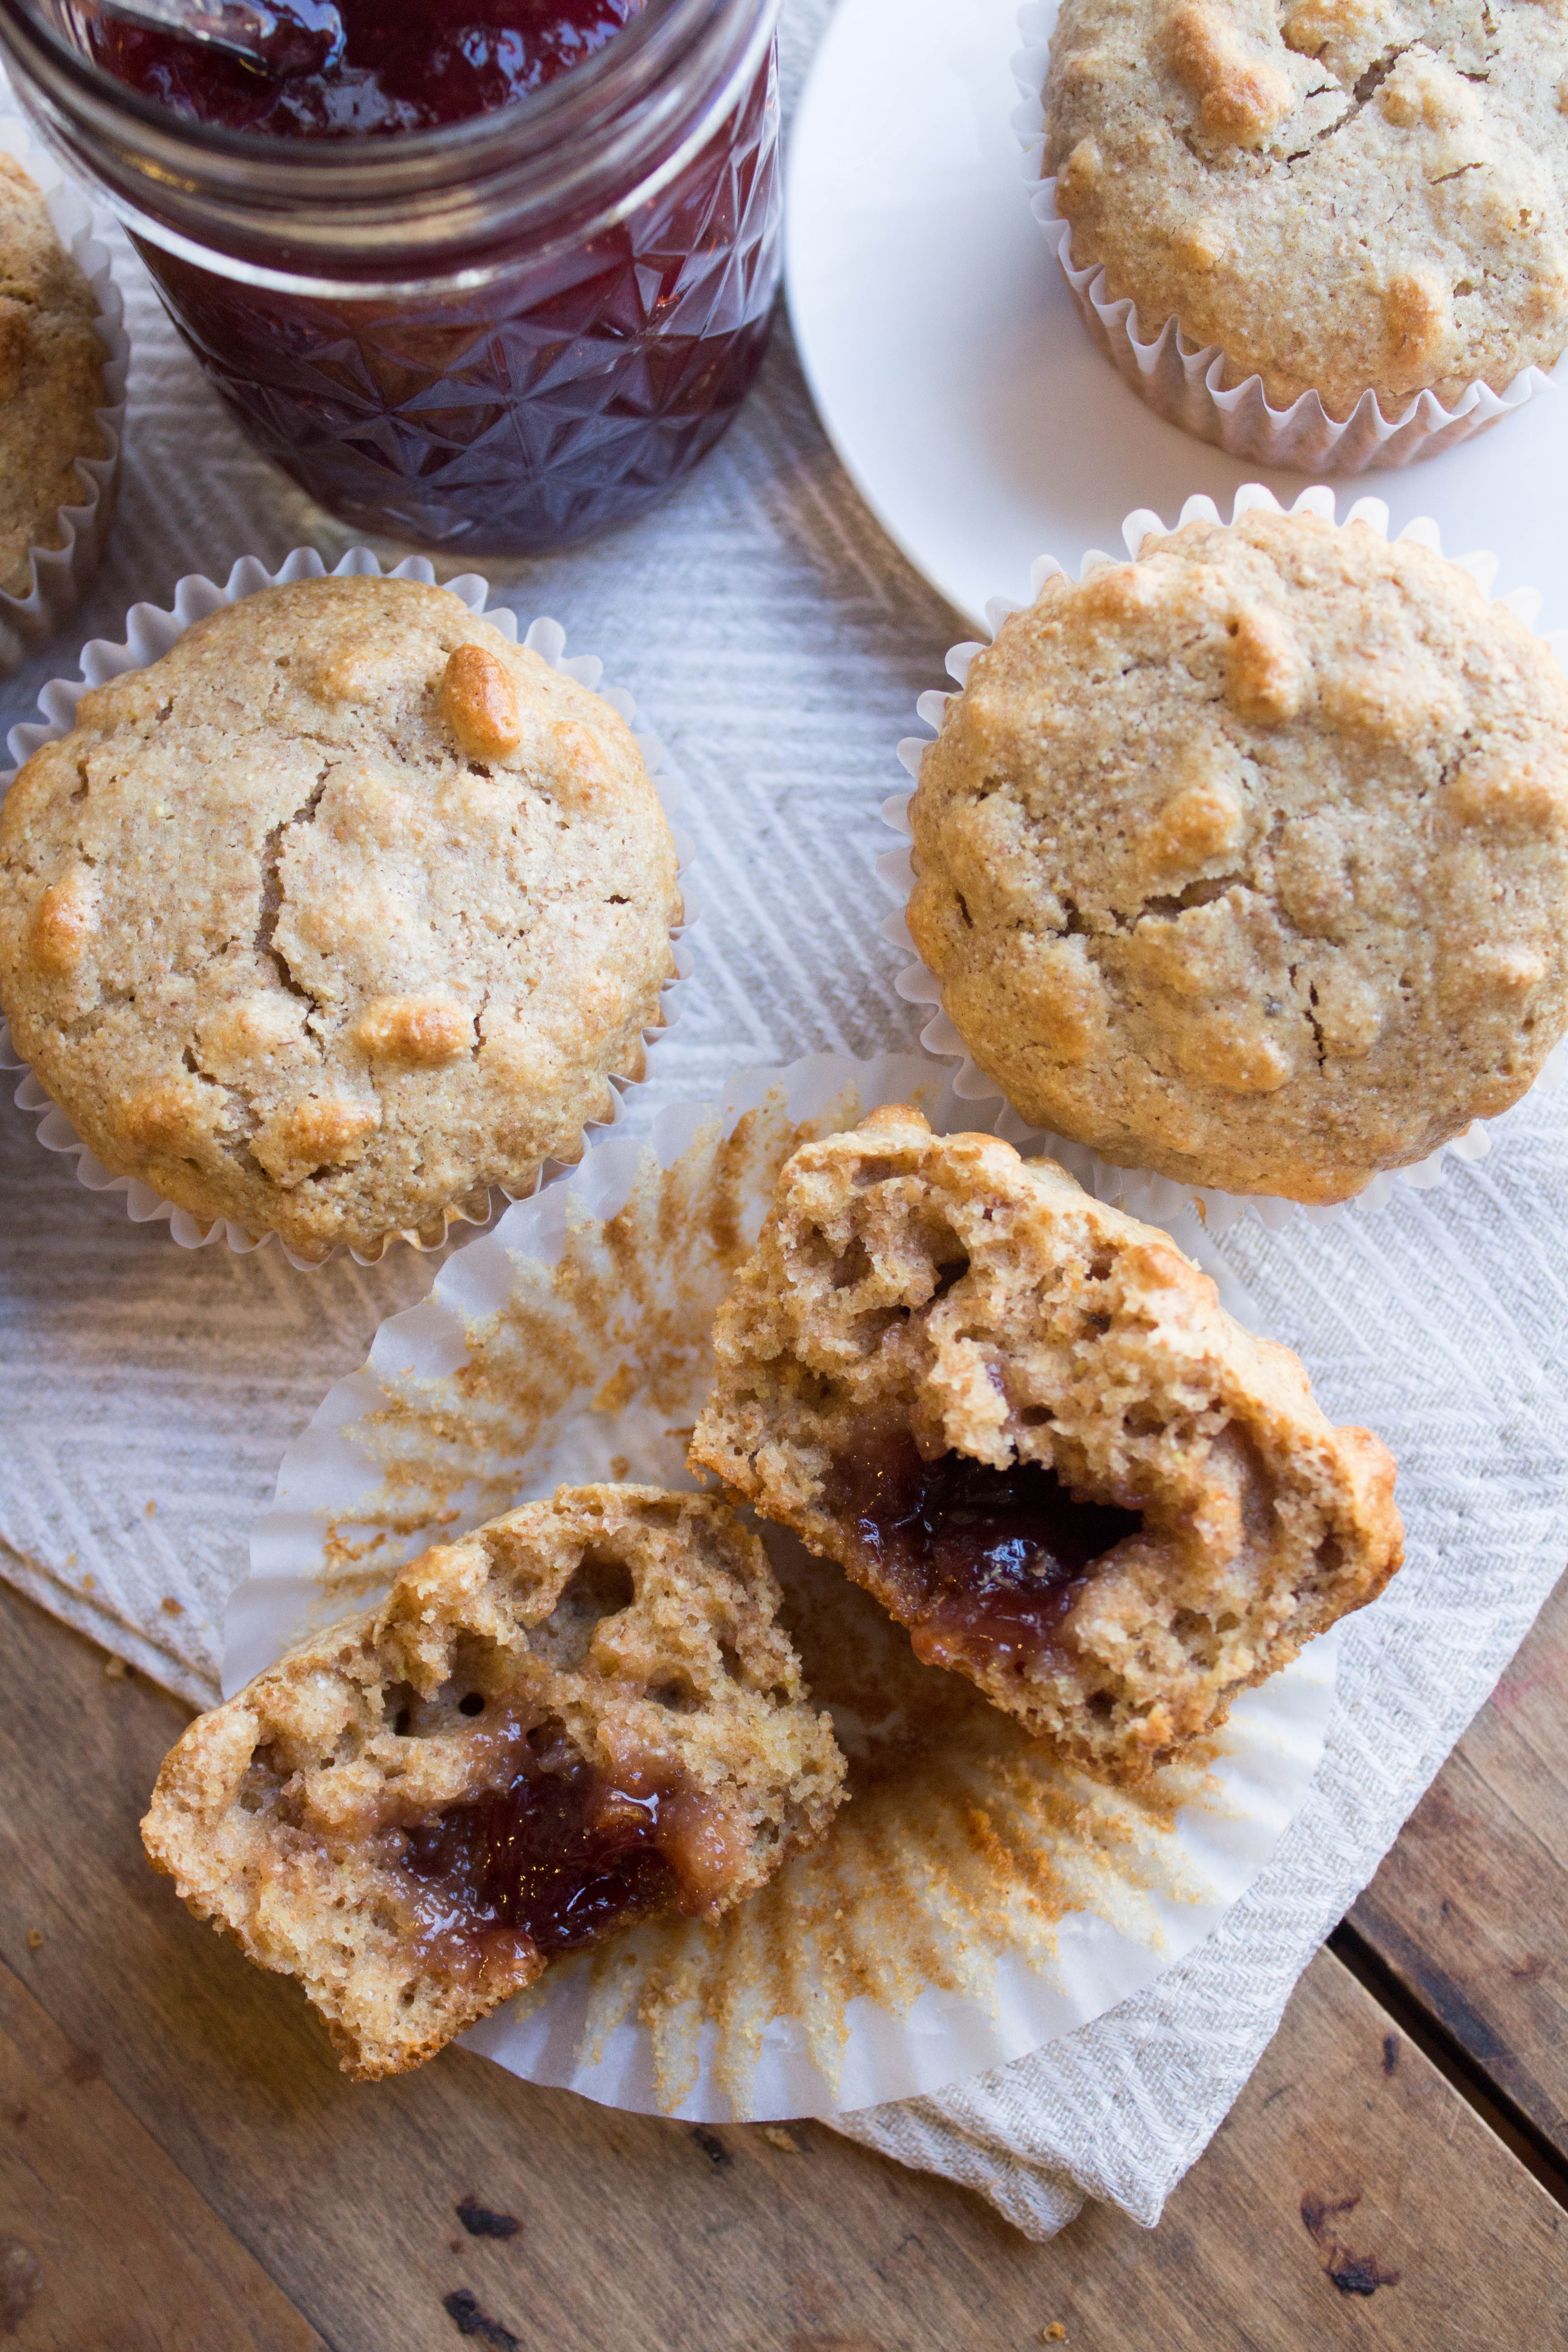 Whole Wheat Peanut Butter and Jelly Muffins Recipe